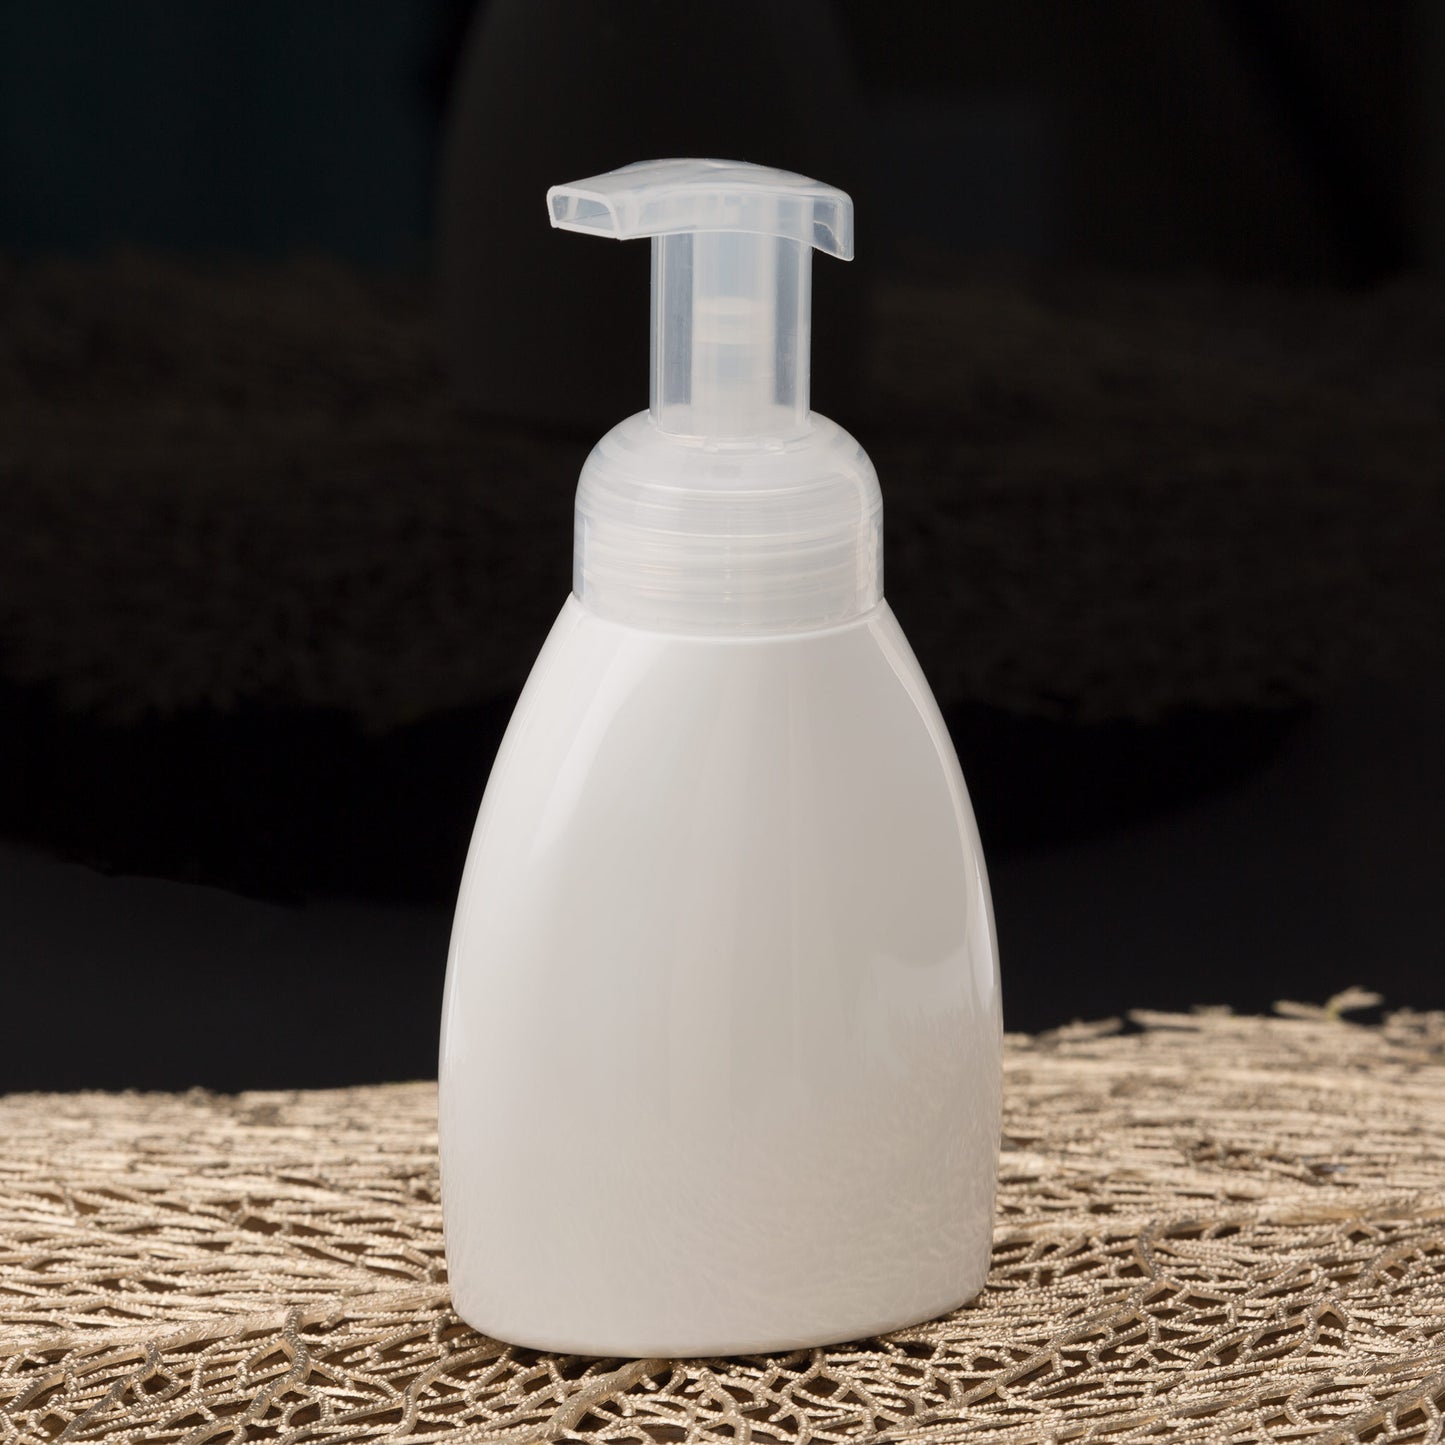 8.4 oz White Oval Foamer Bottle with Natural Pump